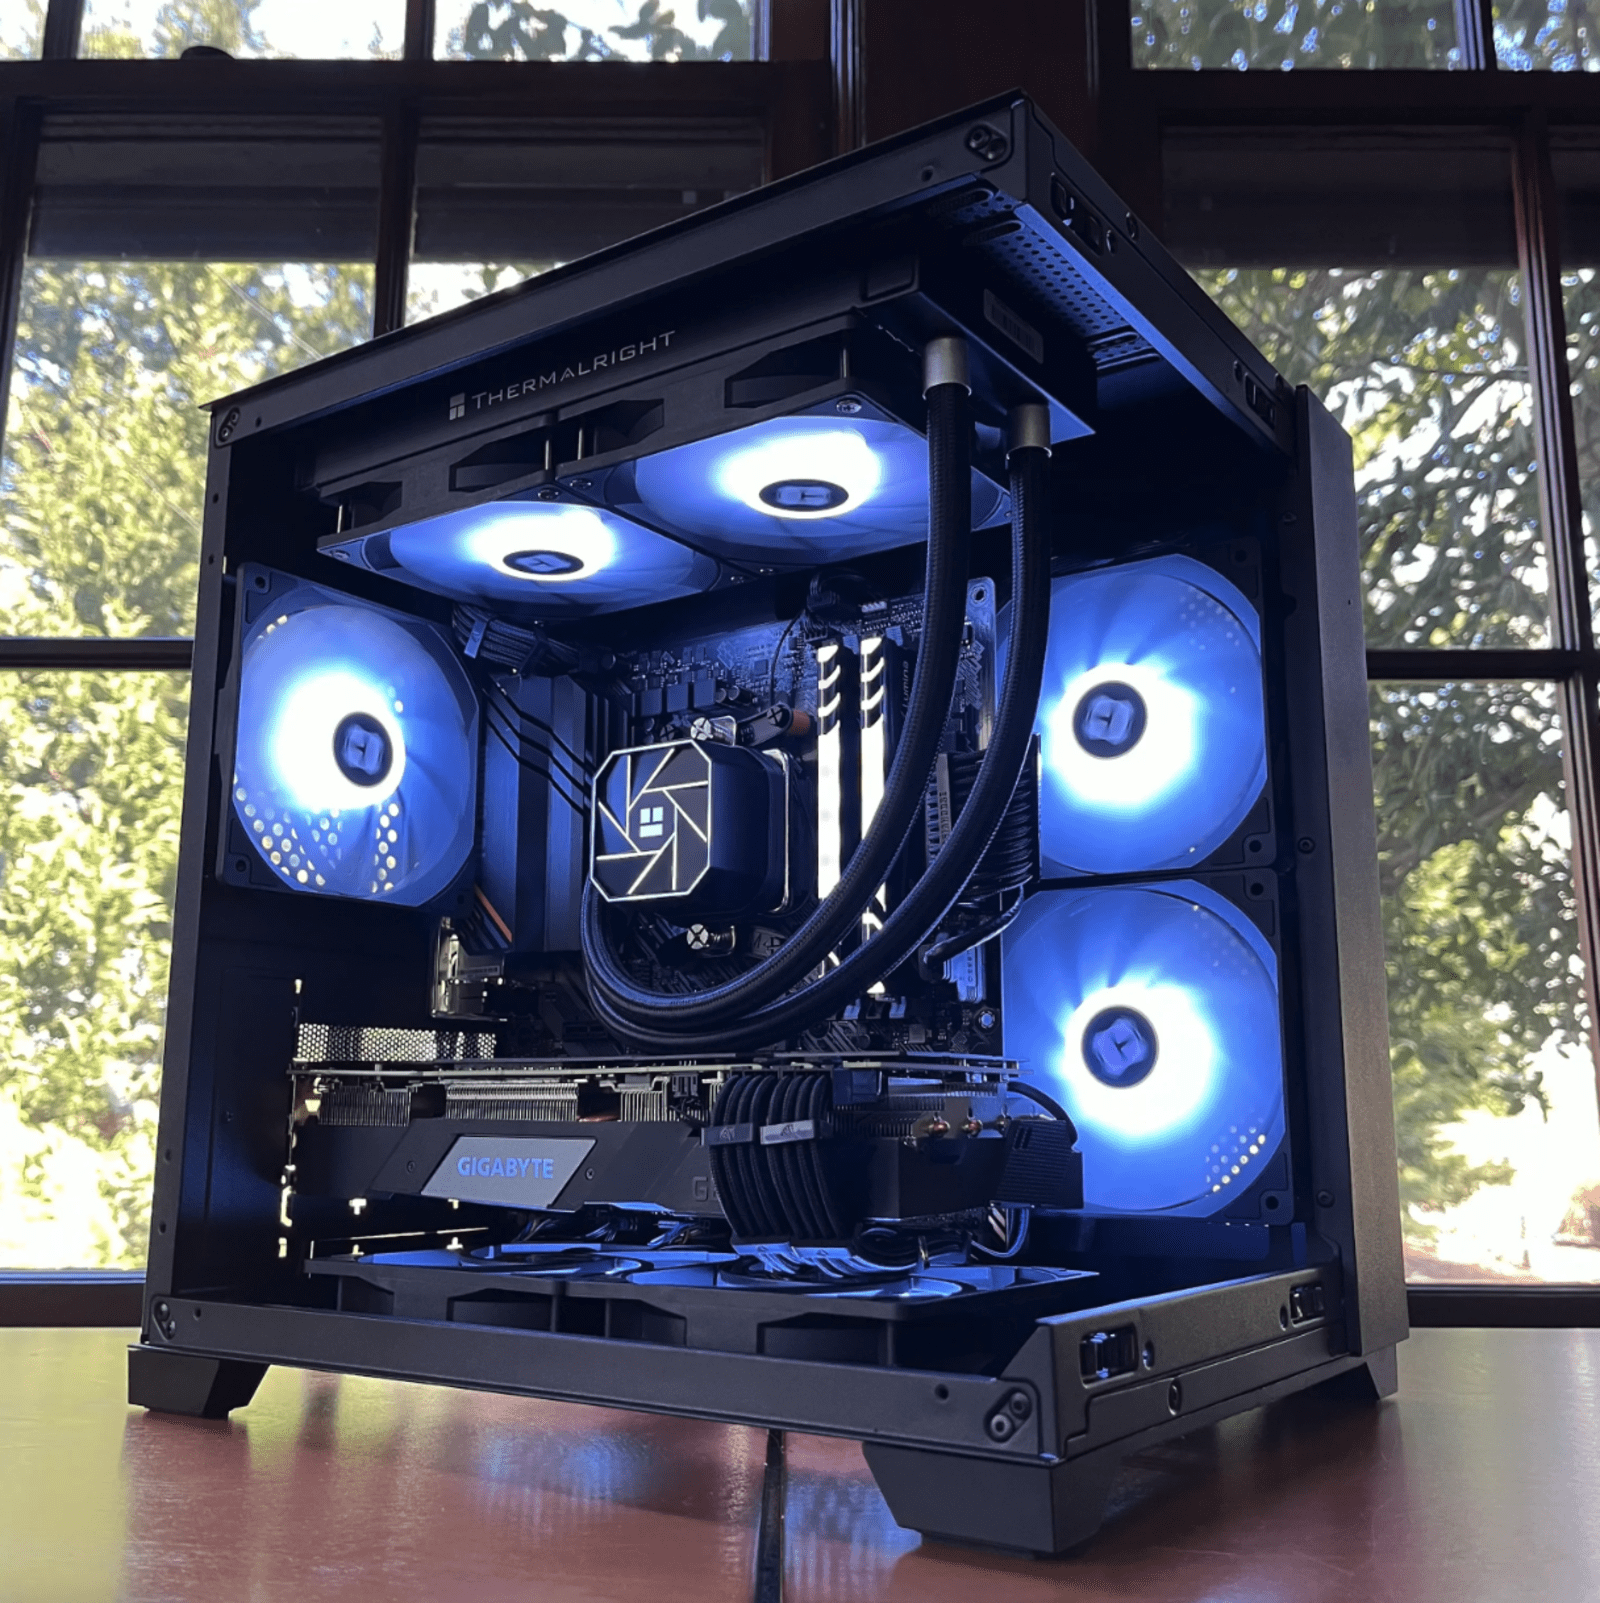 $1000 Prebuilts Don’t Get Much Better Than This!